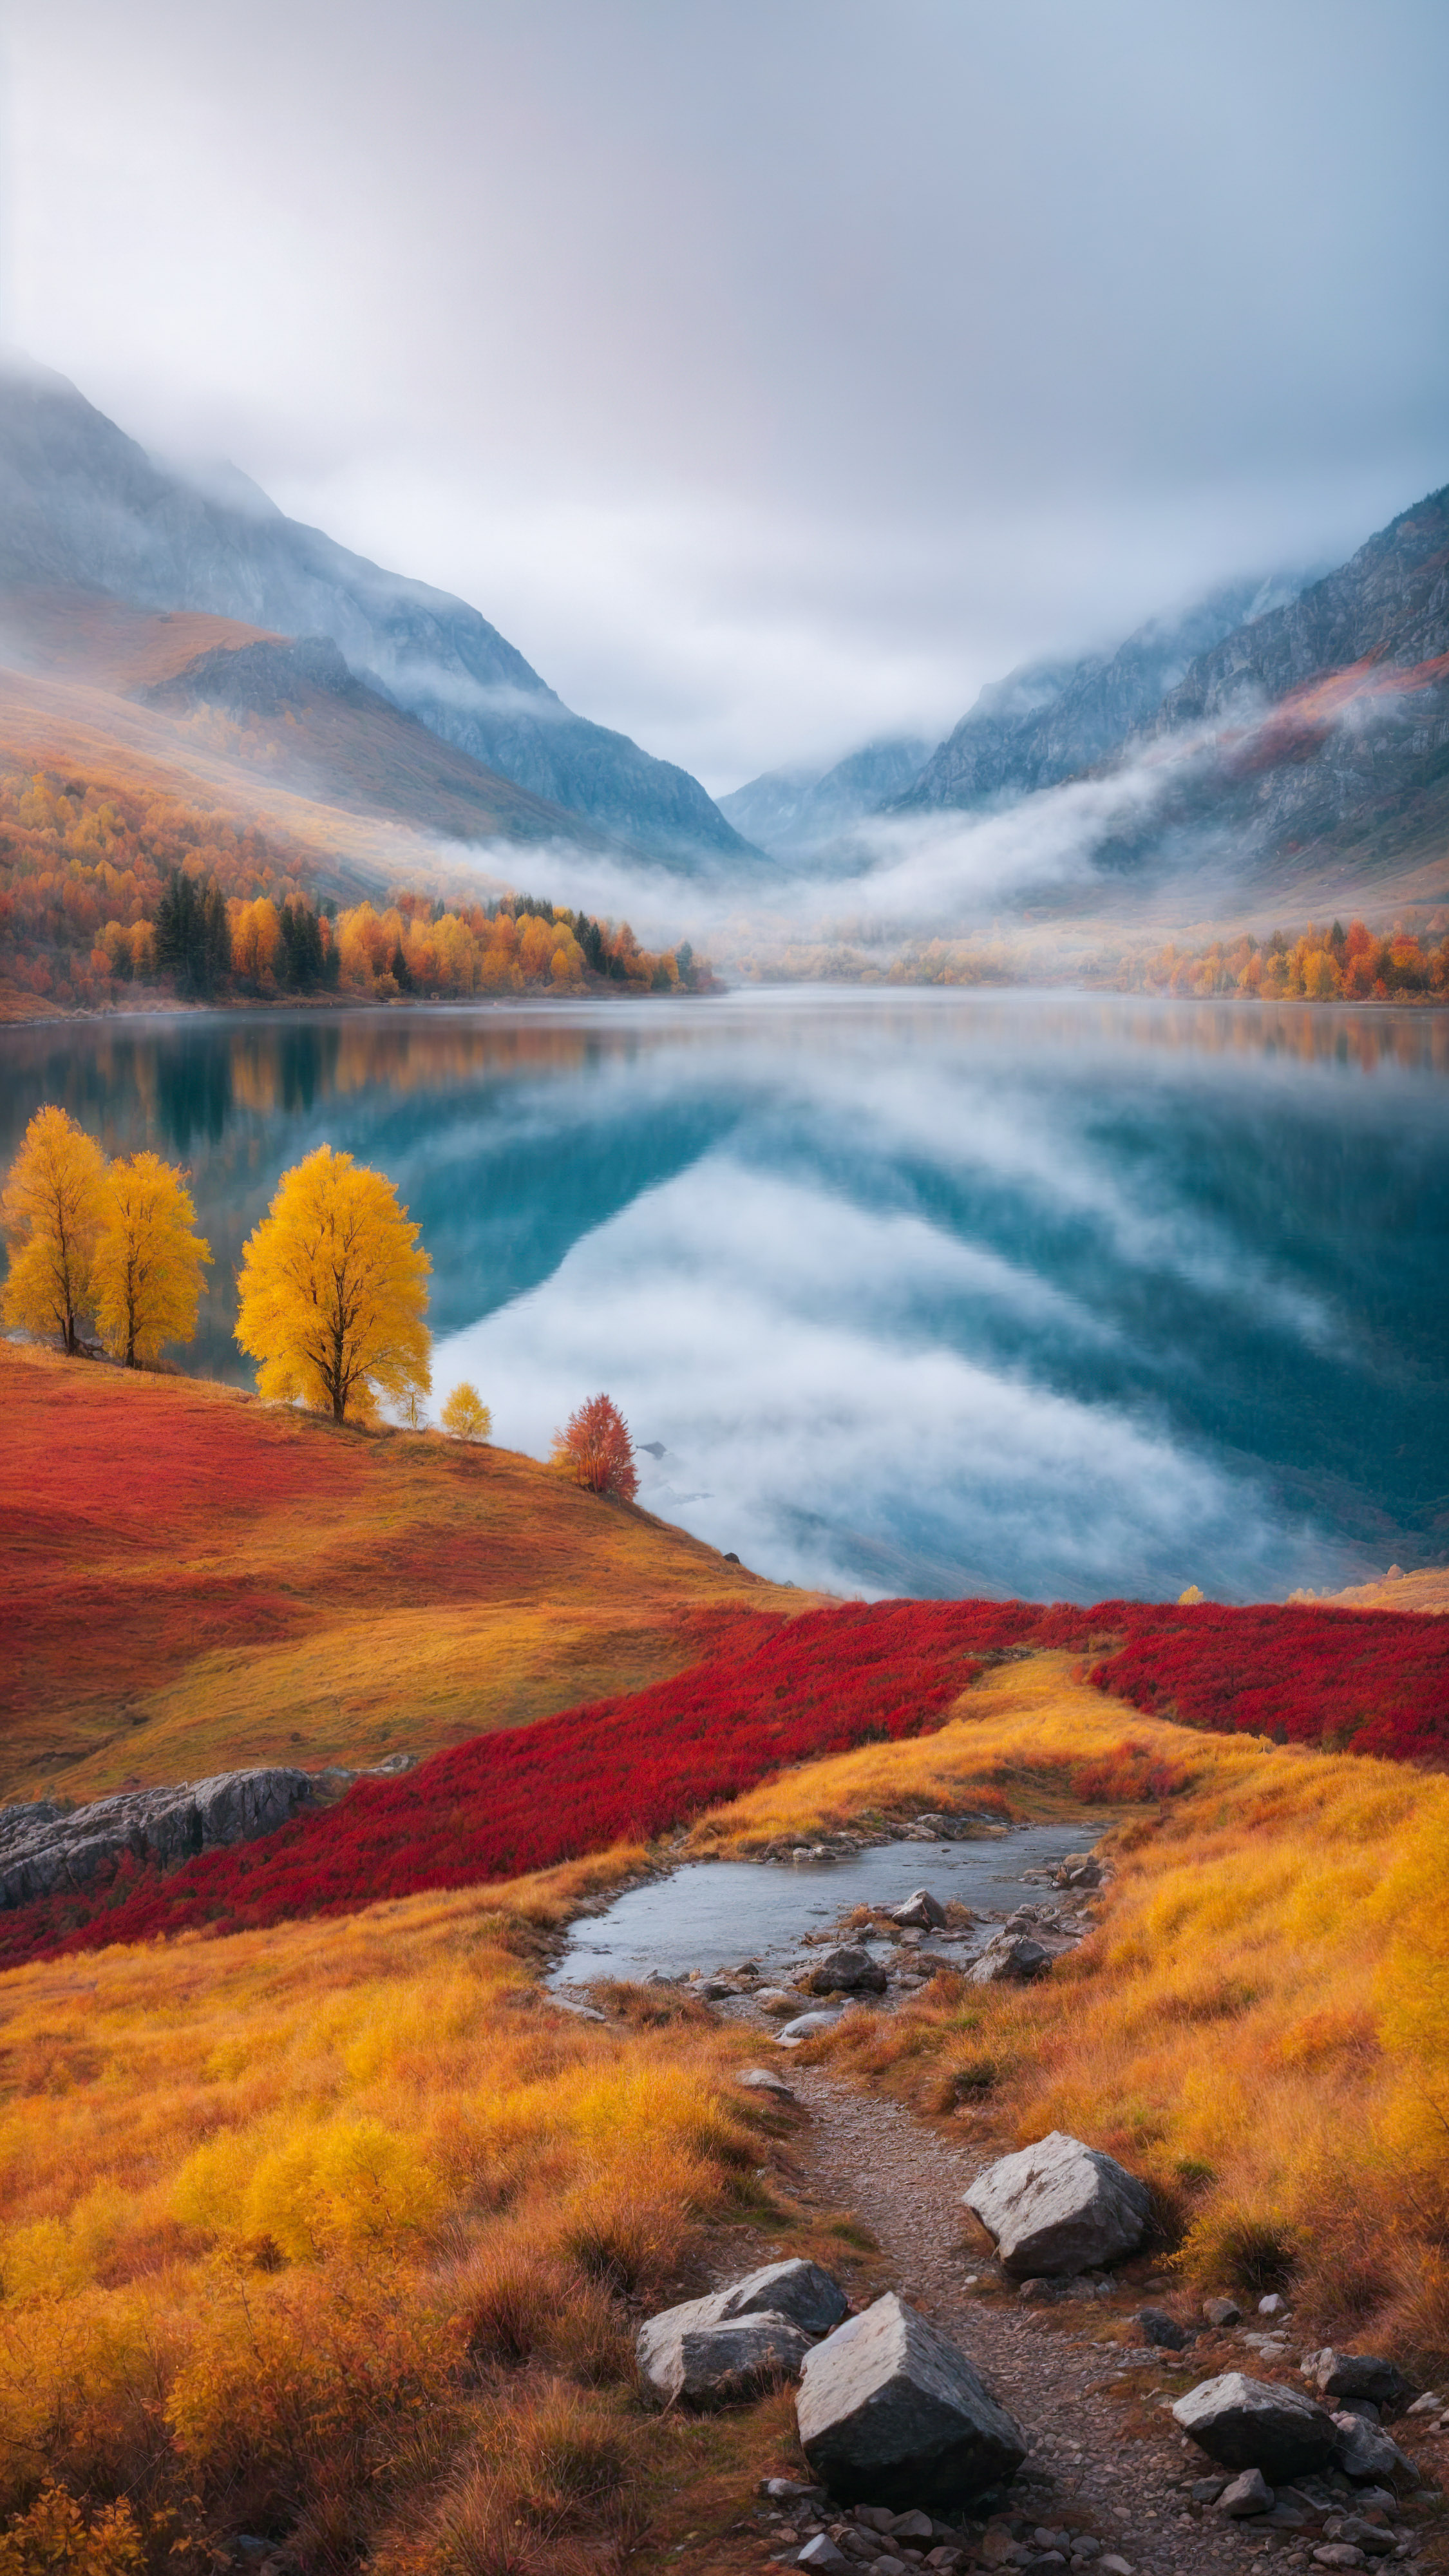 Transform your device’s look with a wallpaper for iPhone featuring a colorful autumn landscape of the mountains, with yellow and red trees and a misty lake.